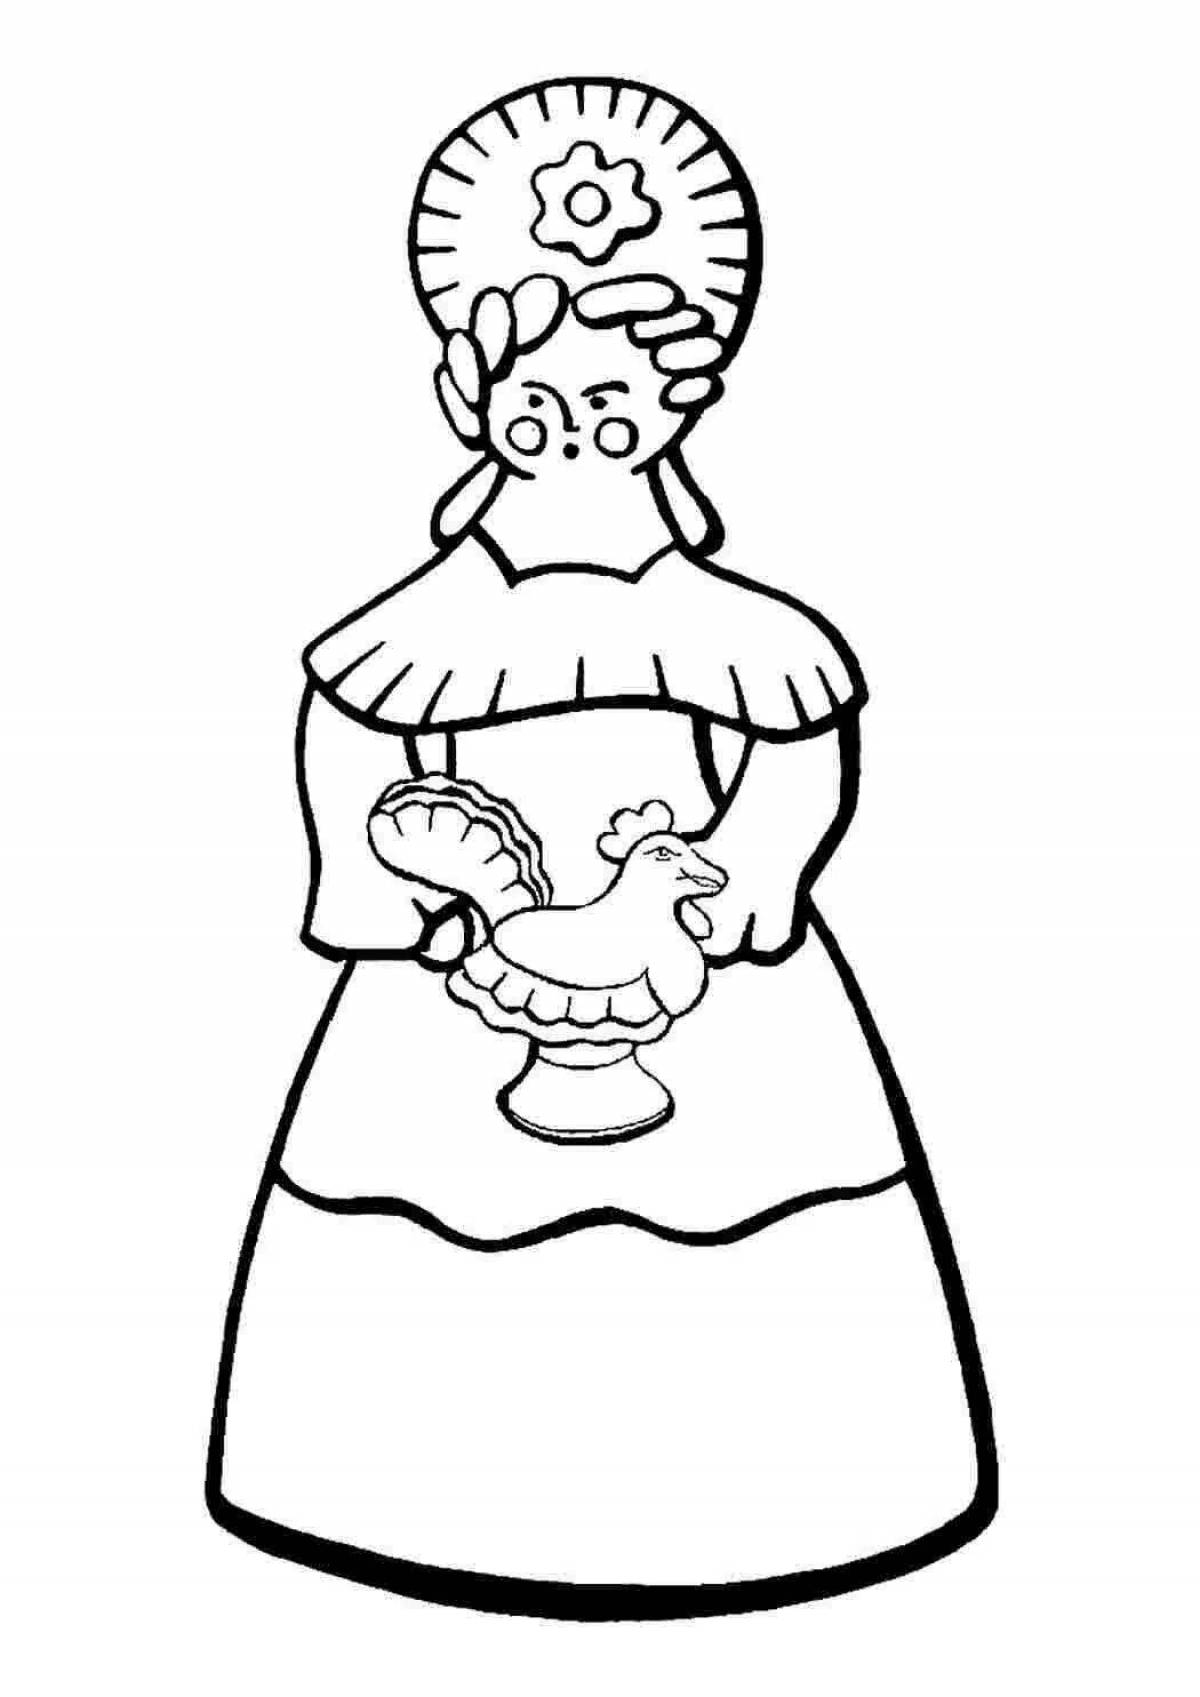 Coloring page funny Dymkovo doll